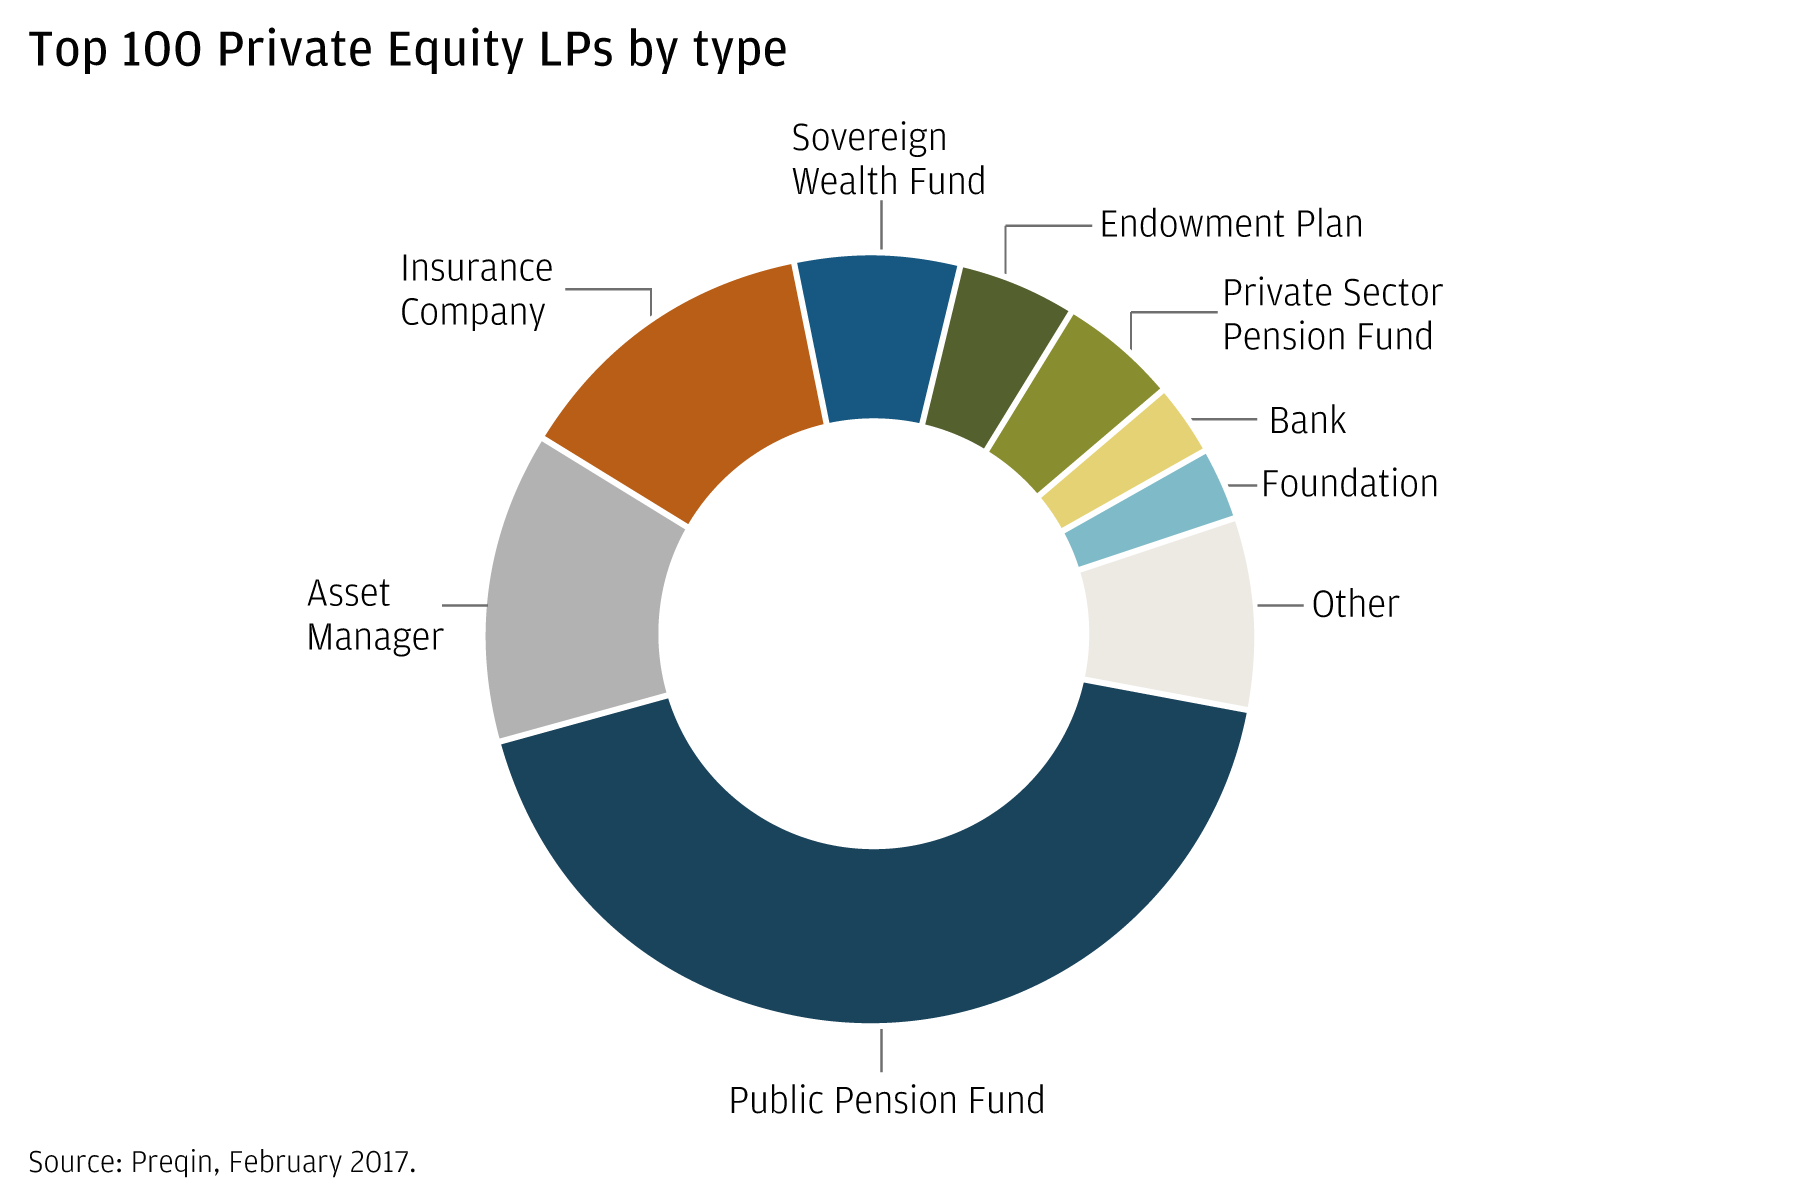 This pie chart shows the percentage composition of the private equity universe by type of fund